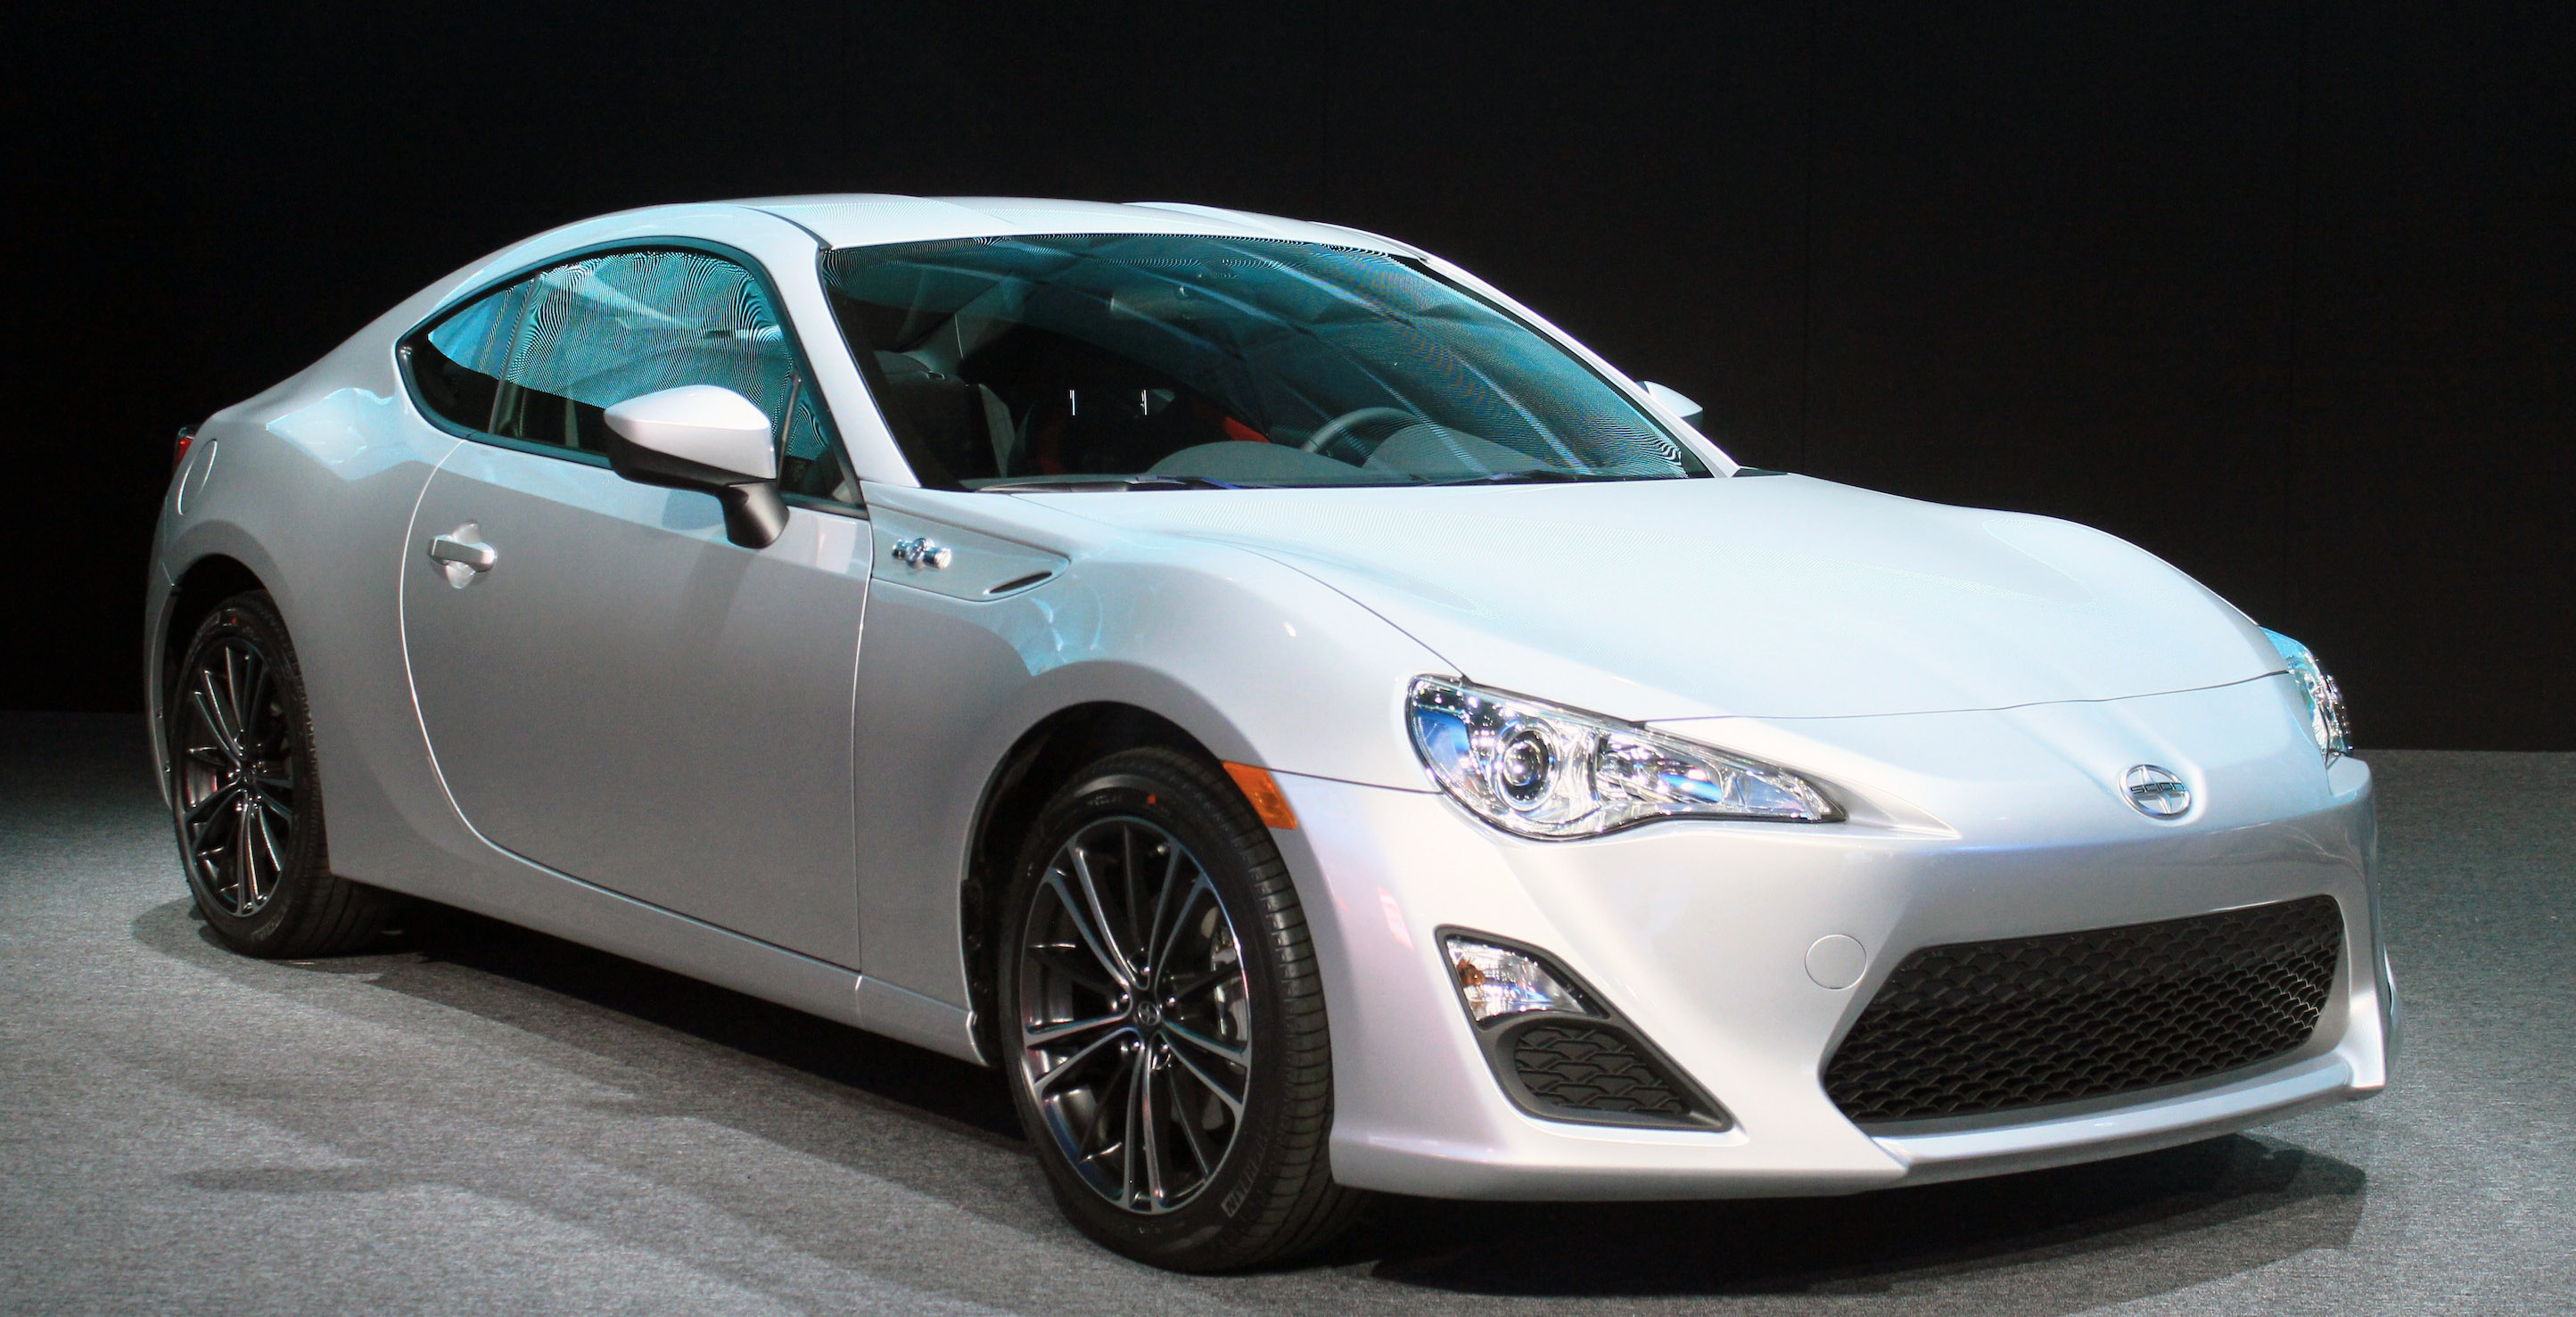 Toyota Confirms That Stripped Scion FR-S Models Not U.S.-Bound